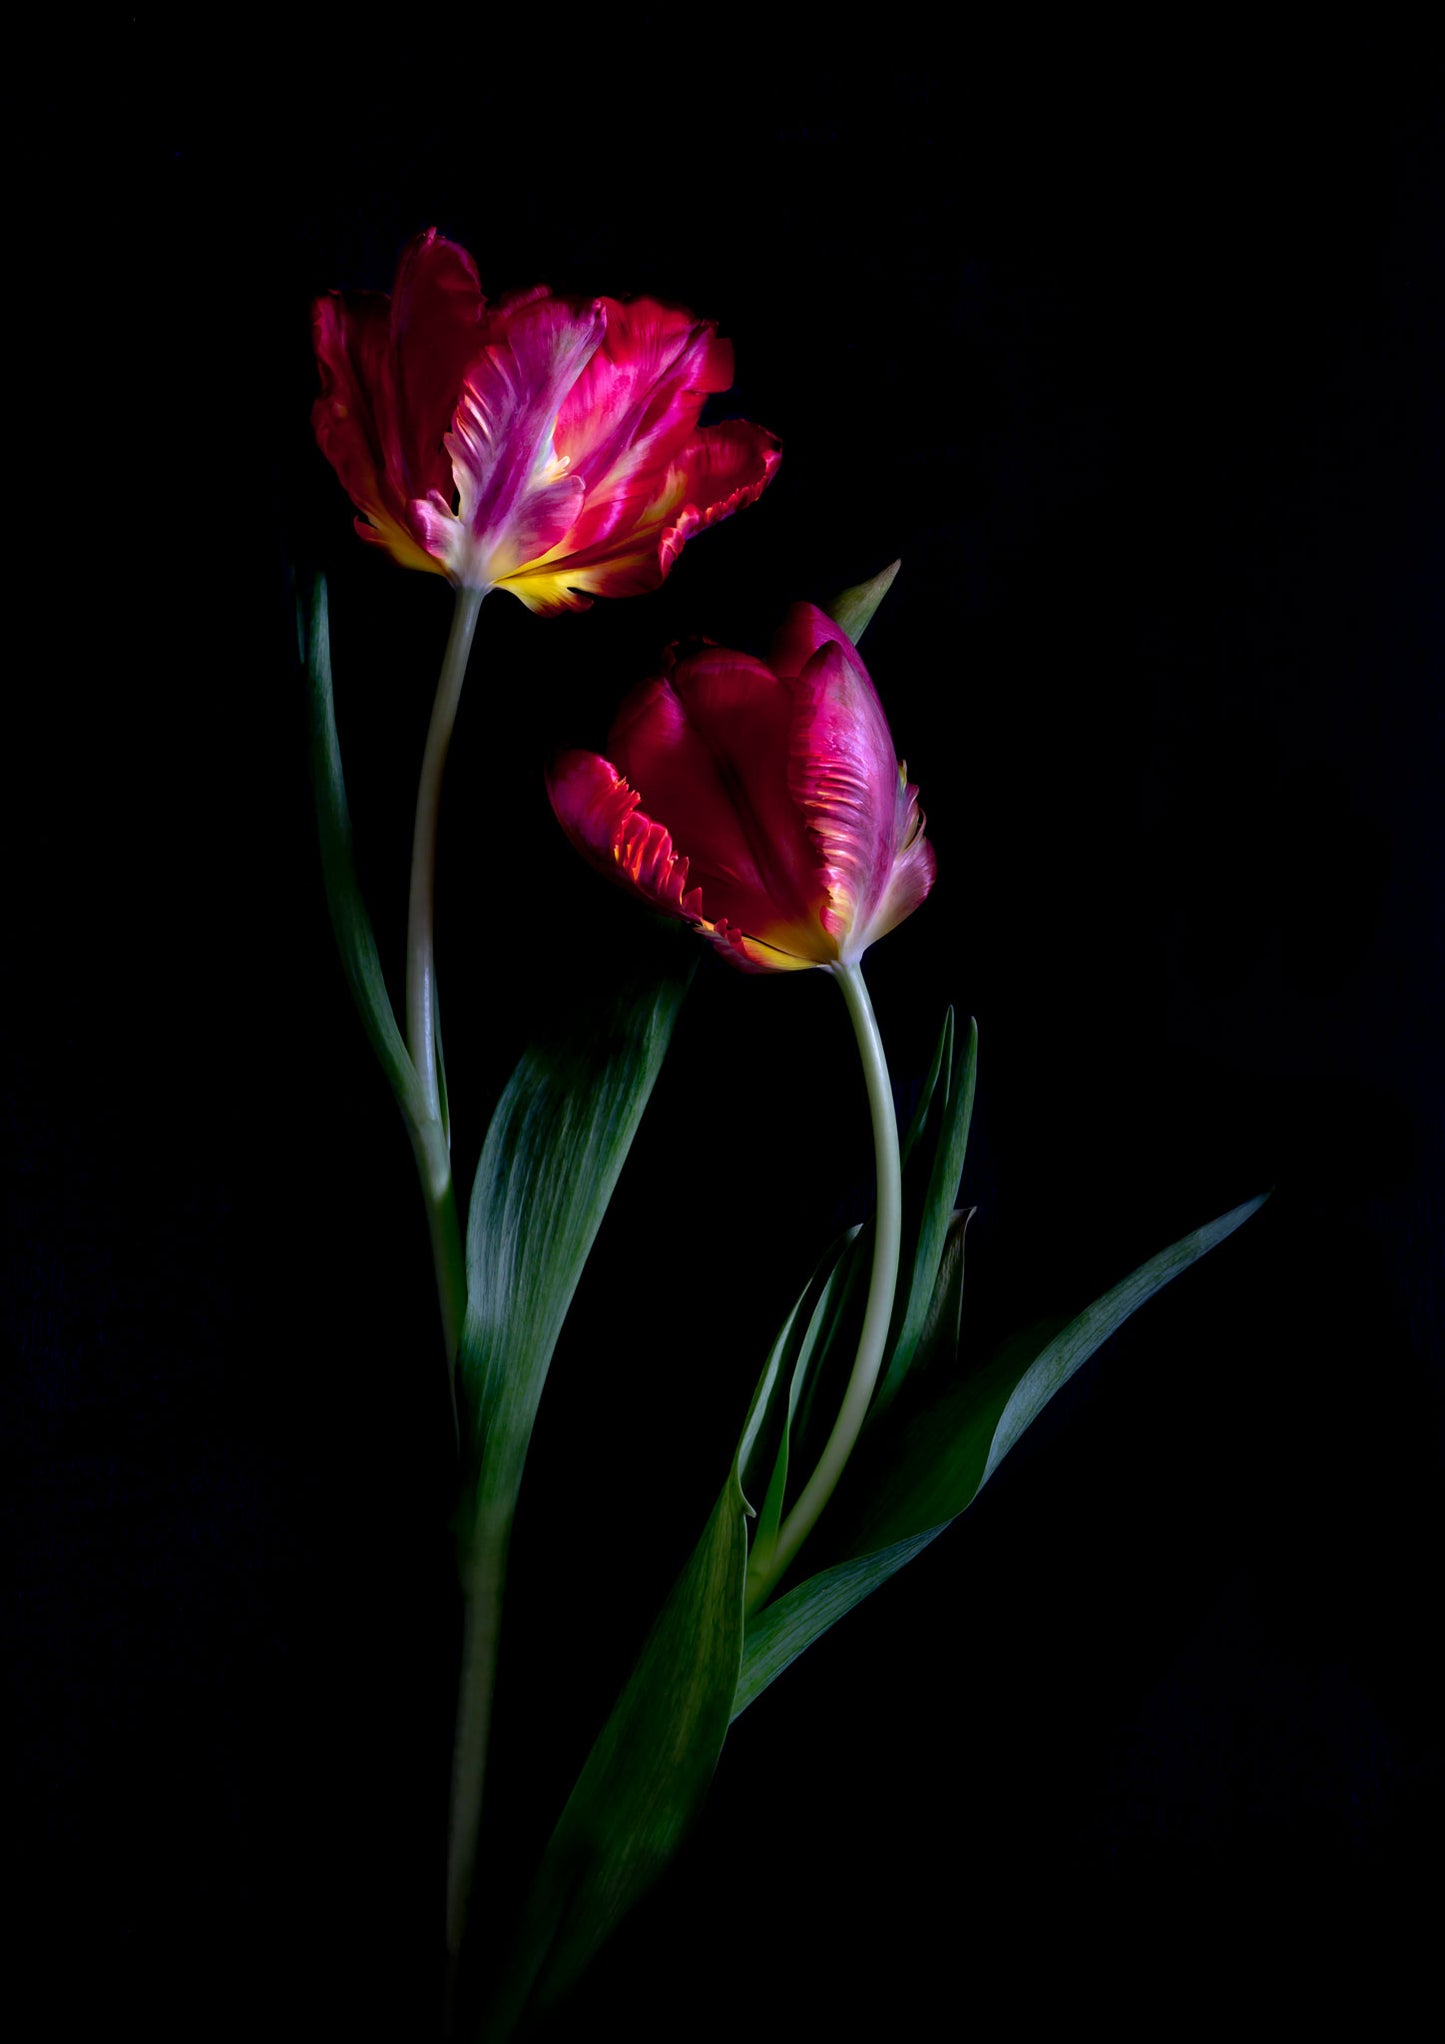 Dark botanical photographic print, featuring Rococo Tulips on a black background.